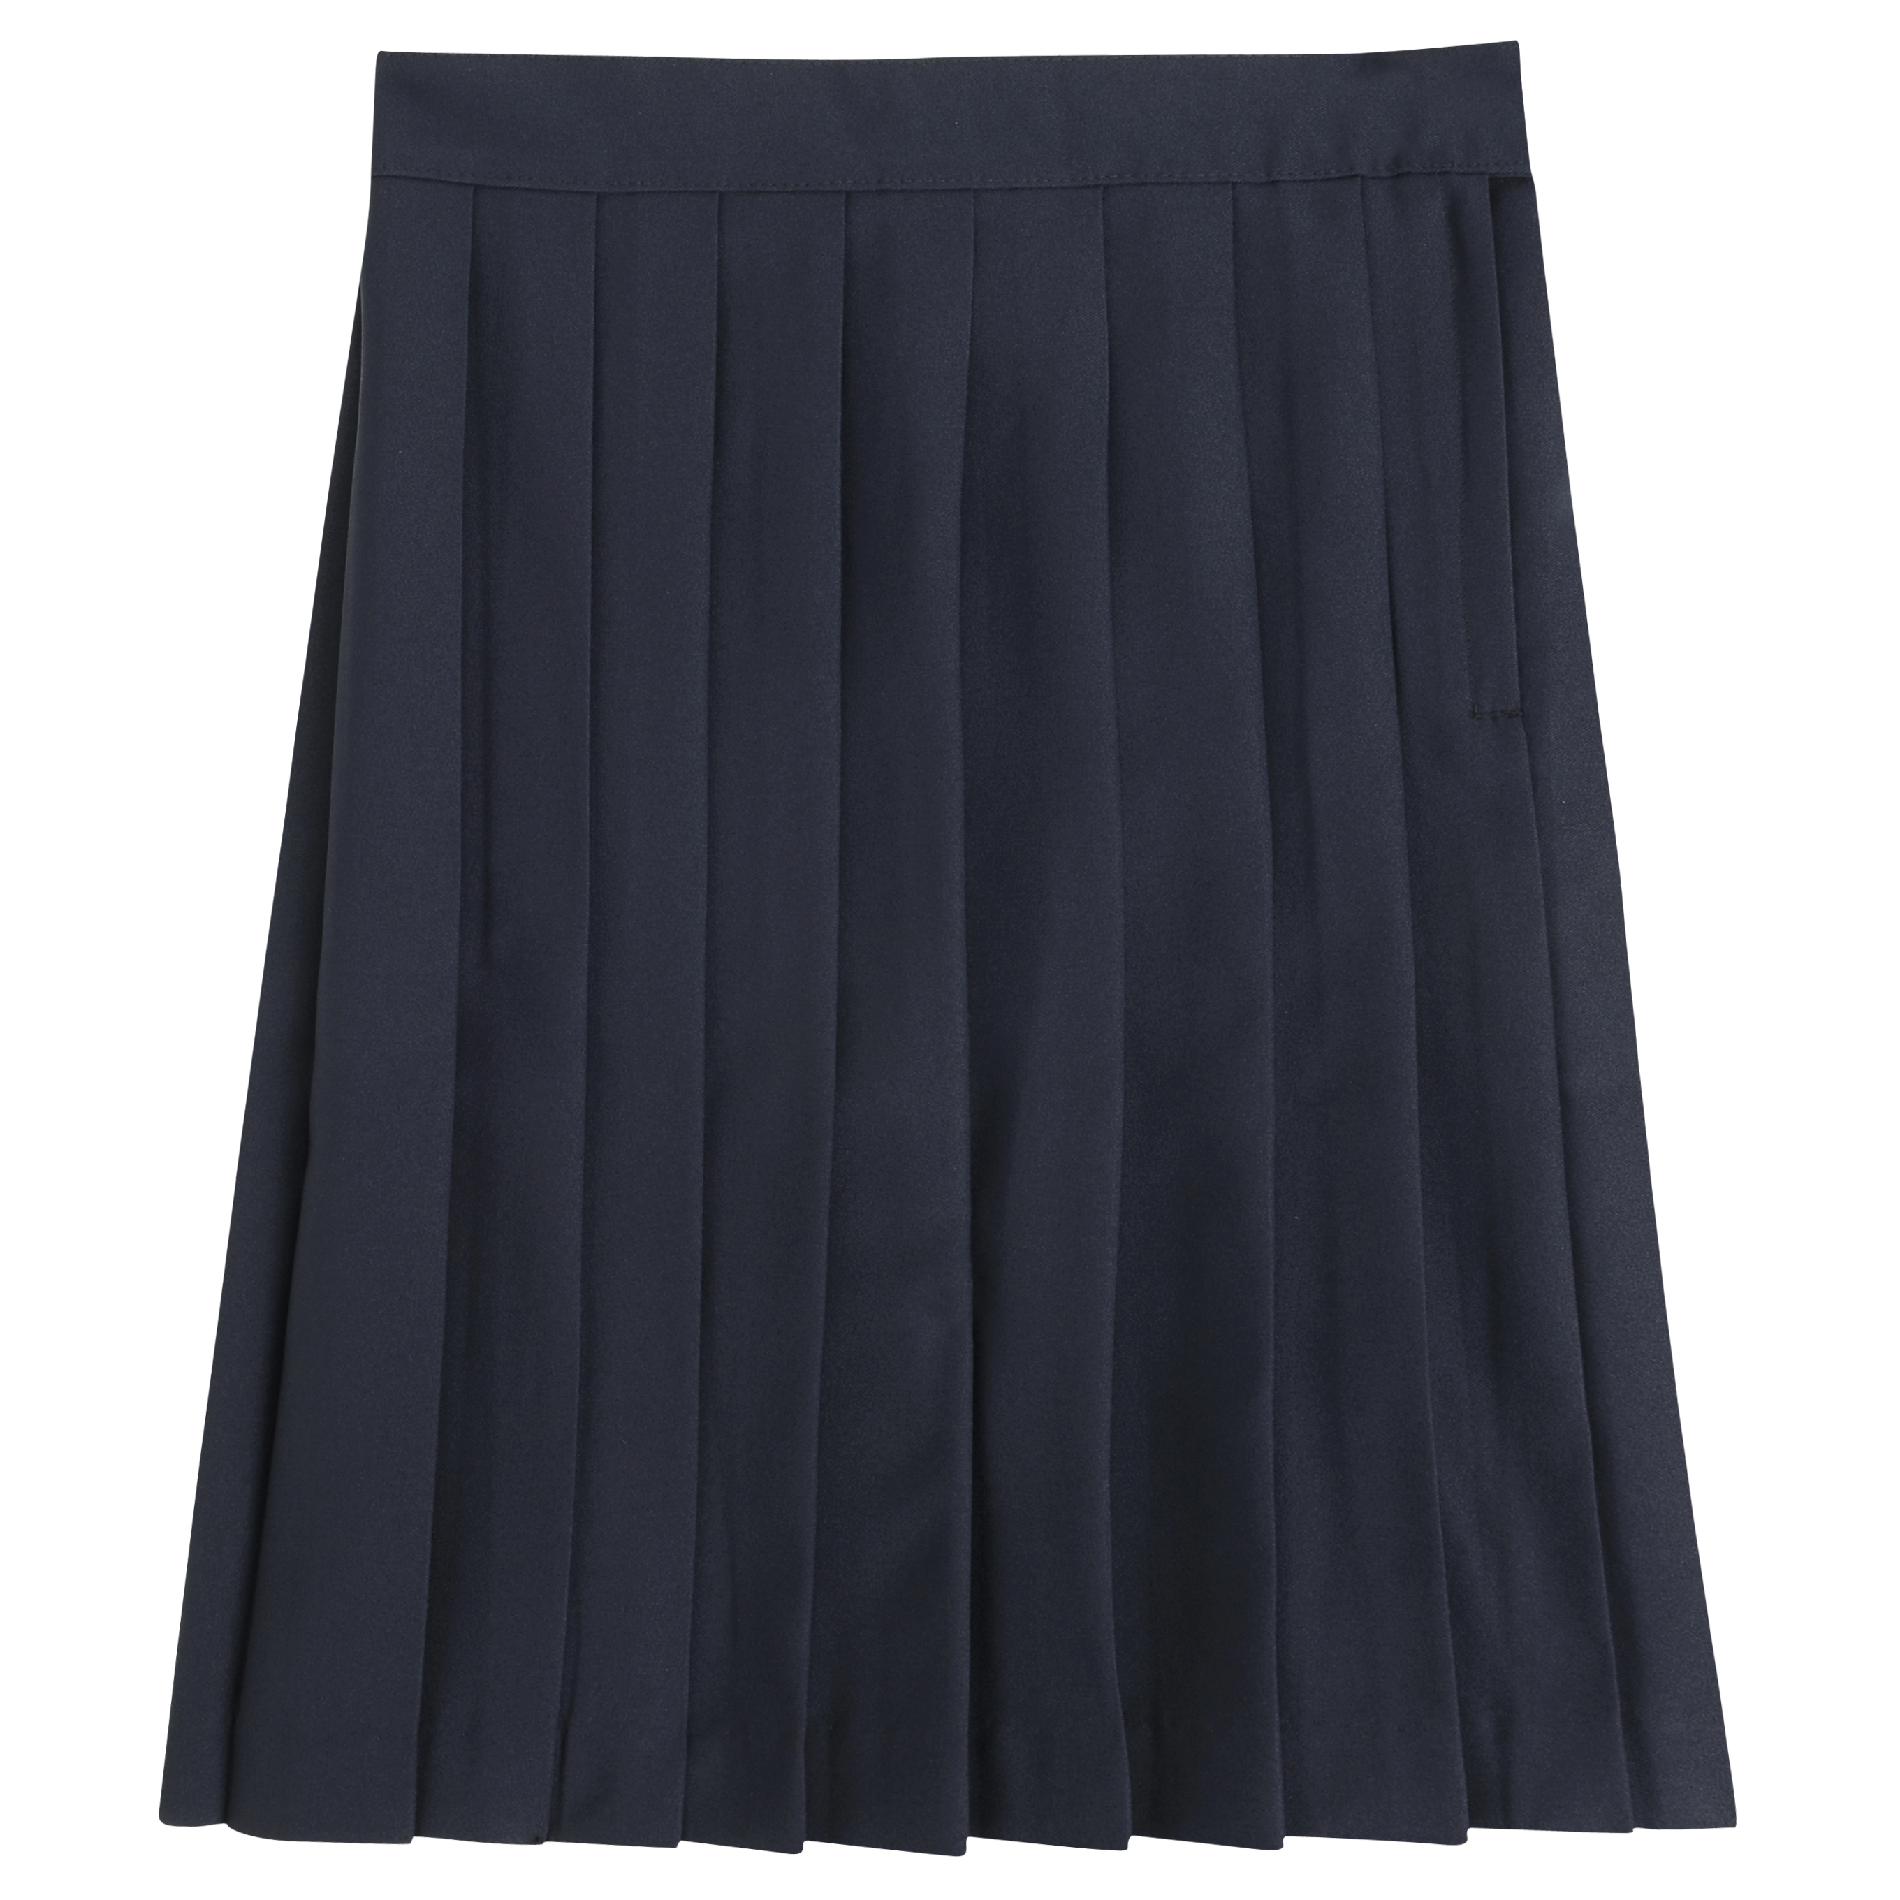 At School by French Toast Girls 4-20 Pleated Skirt